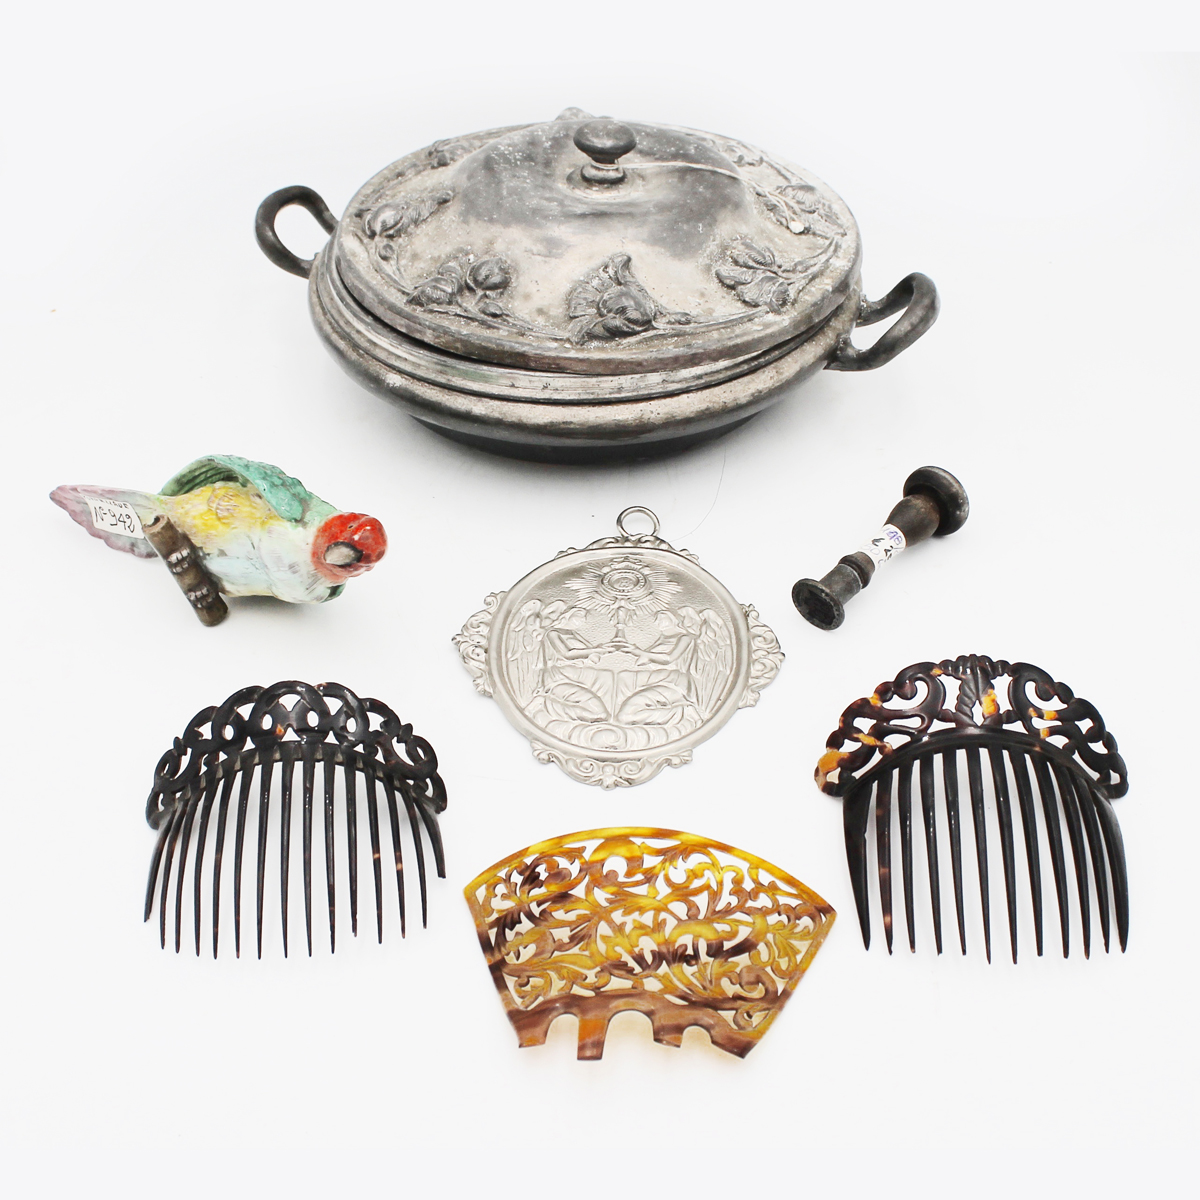 LOTTO DI OGGETTI DI VARIO GENERE - LOT OF VARIOUS OBJECTS - Image 2 of 3